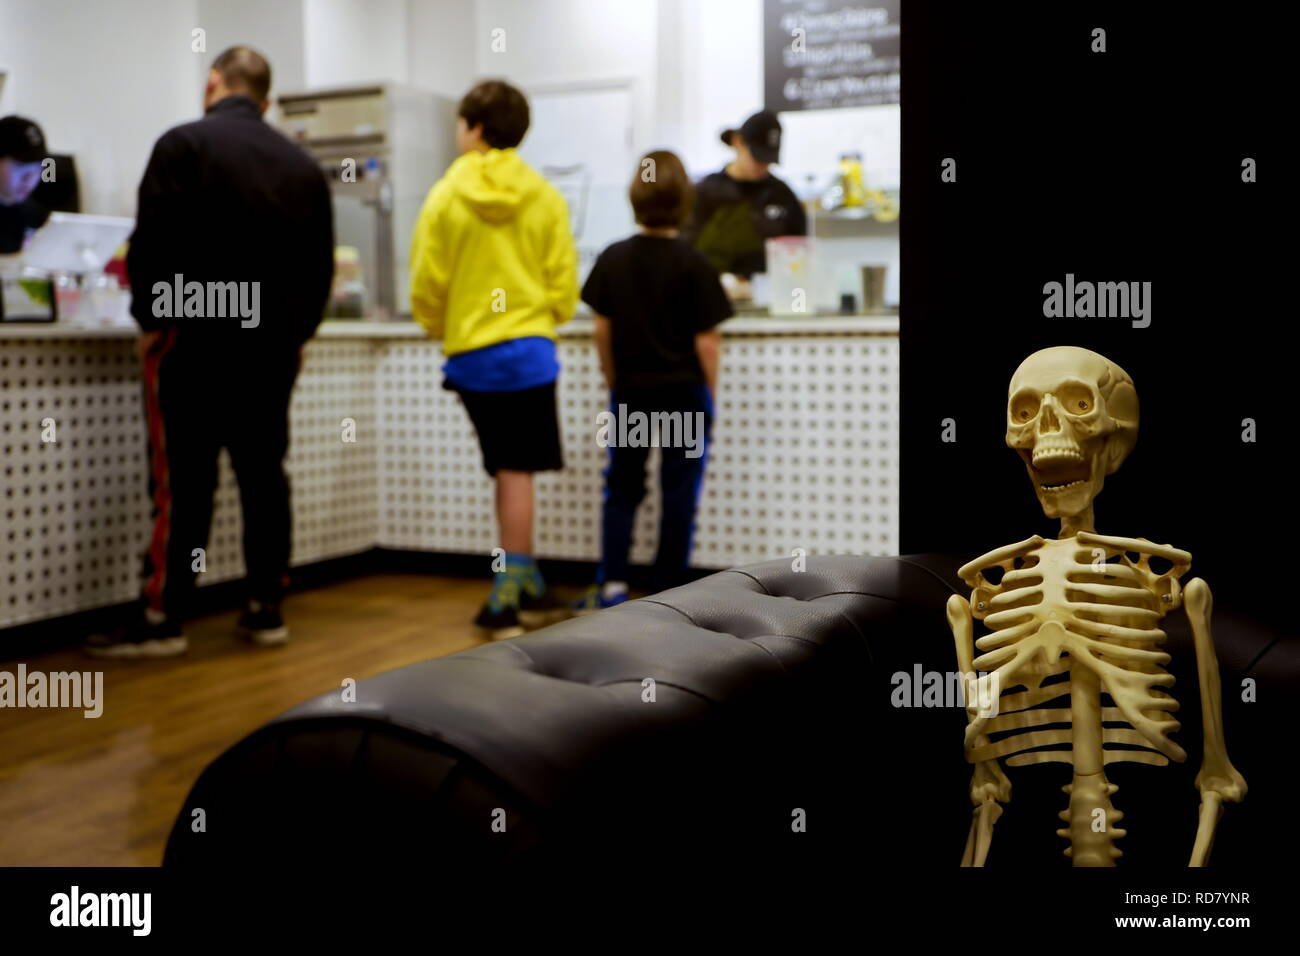 Storrs, CT USA. Nov 2018. Halloween skeleton ornament sitting on couch at an ice cream parlor, or just humorously slow  service. Stock Photo